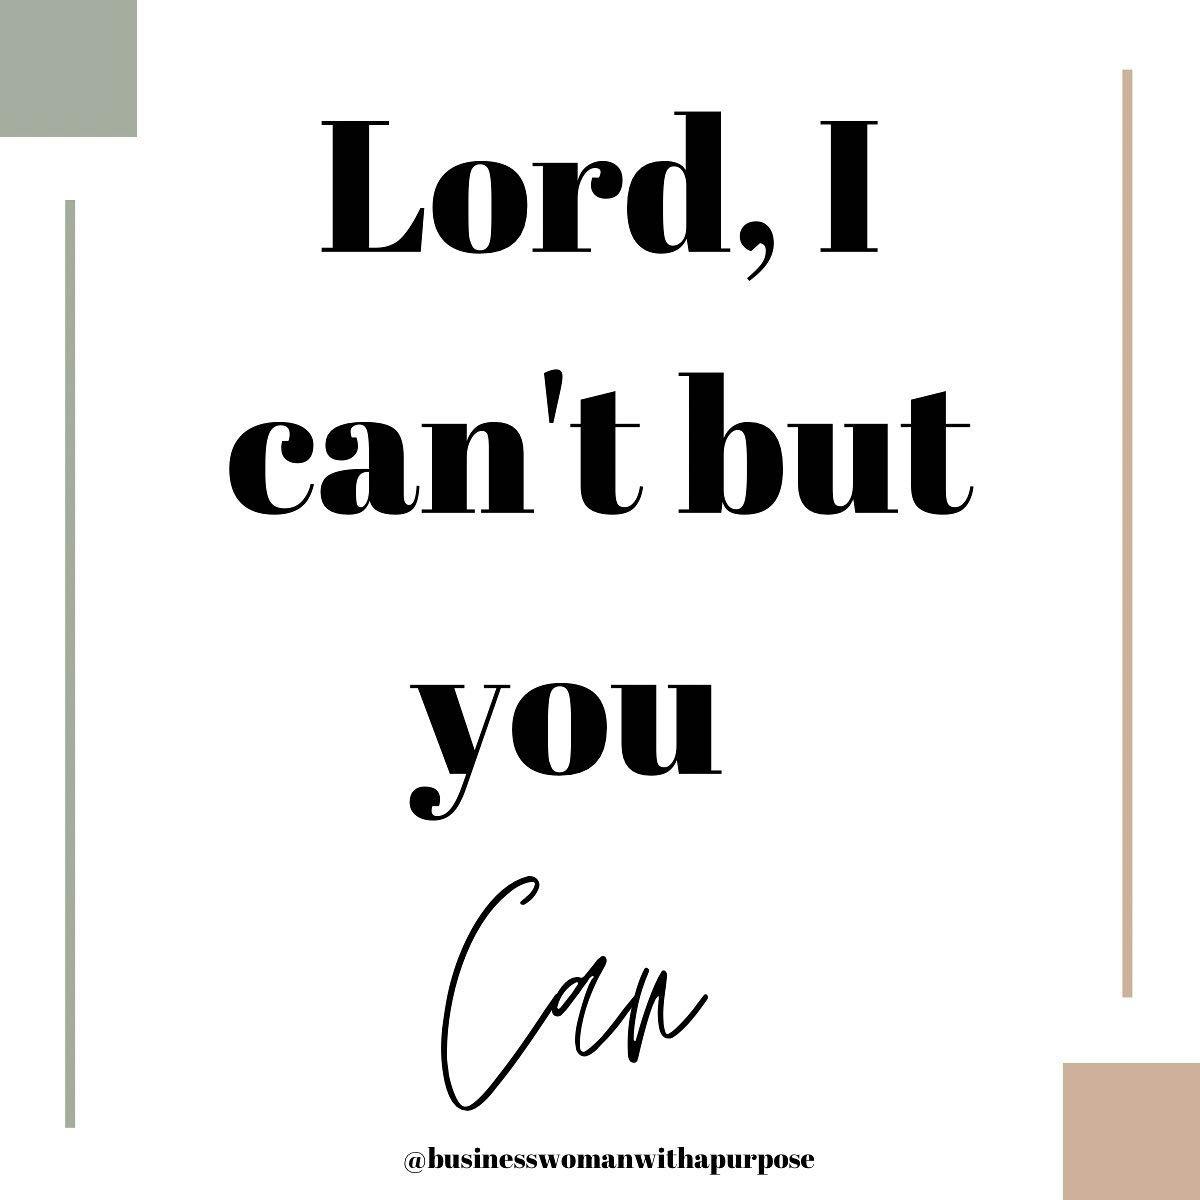 When you feel like you aren’t able to do something, do whatever you can and God will do what you can’t. God already knows where you lack and it’s okay to need Him every step of the way.
•
•
Do you have faith that God will pick up where you lack?